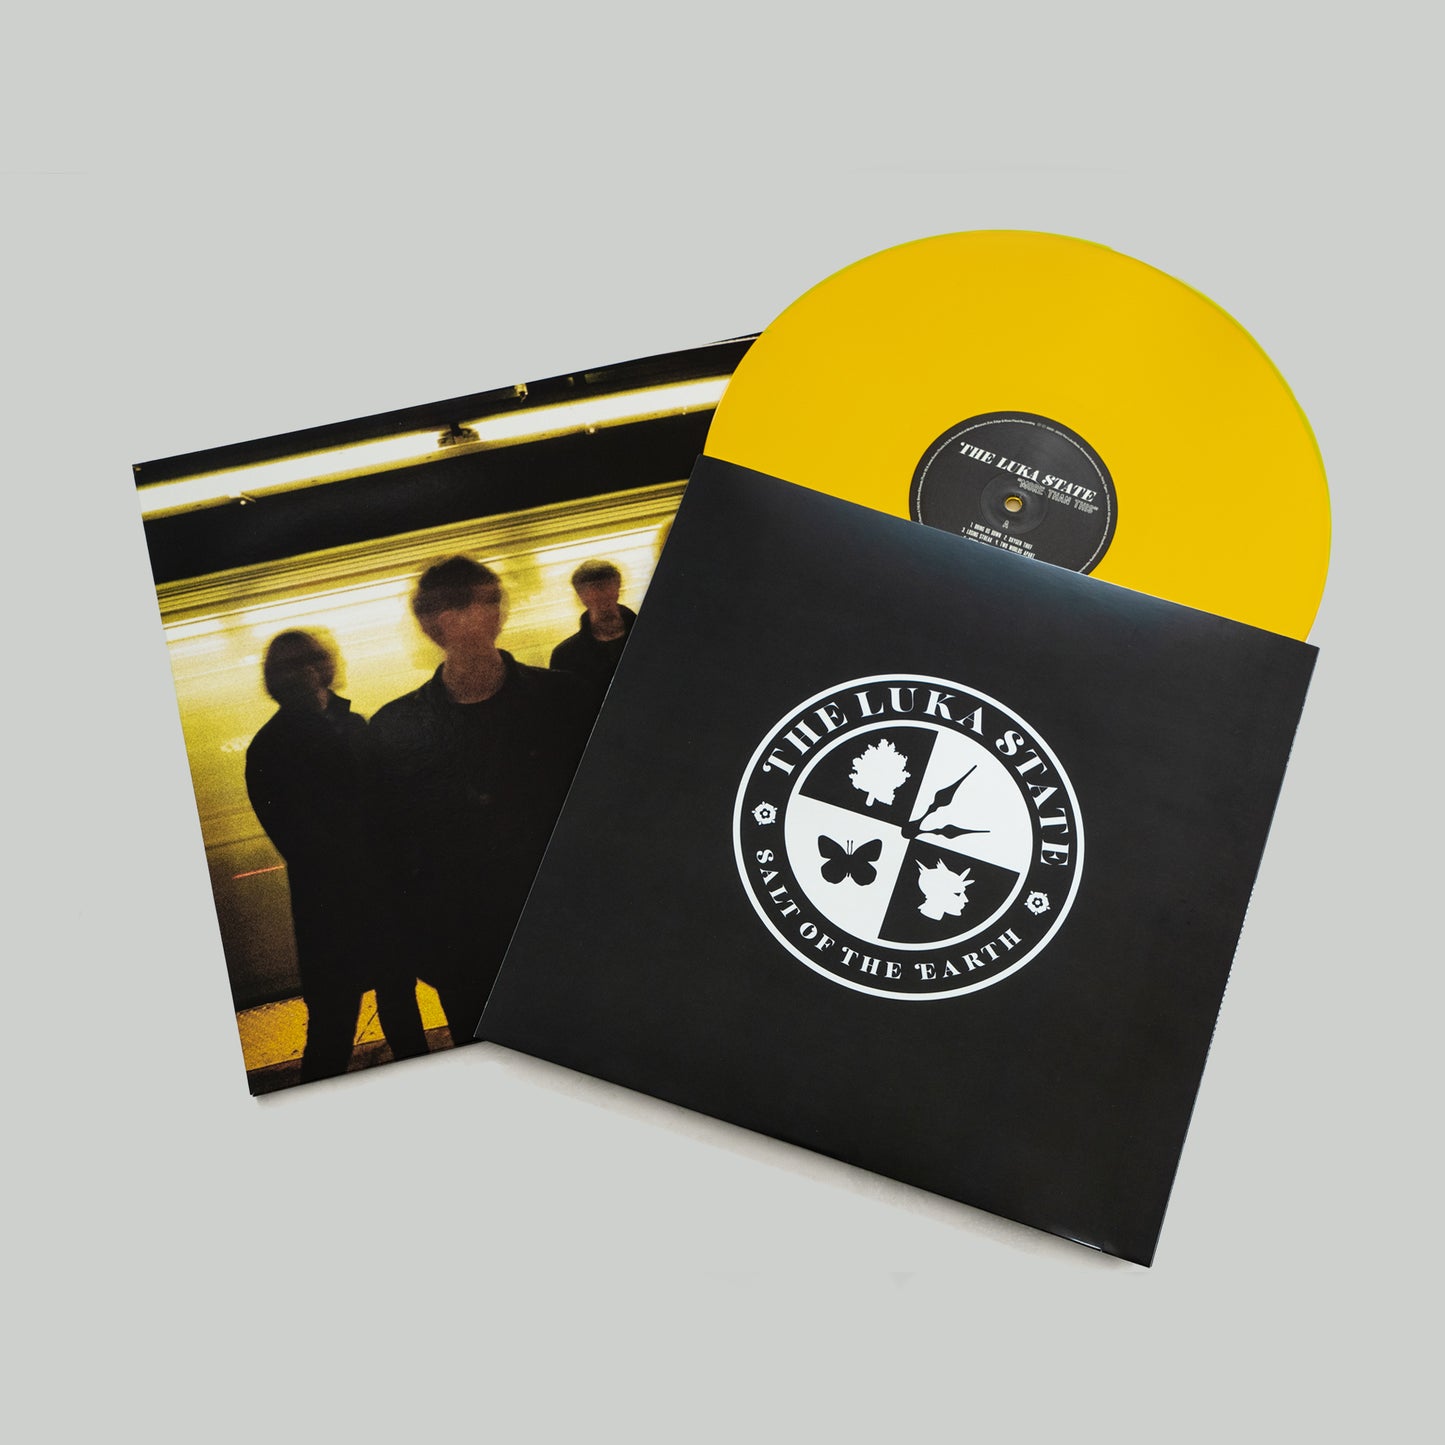 MORE THAN THIS | Limited Edition 12" Vinyl (Yellow)